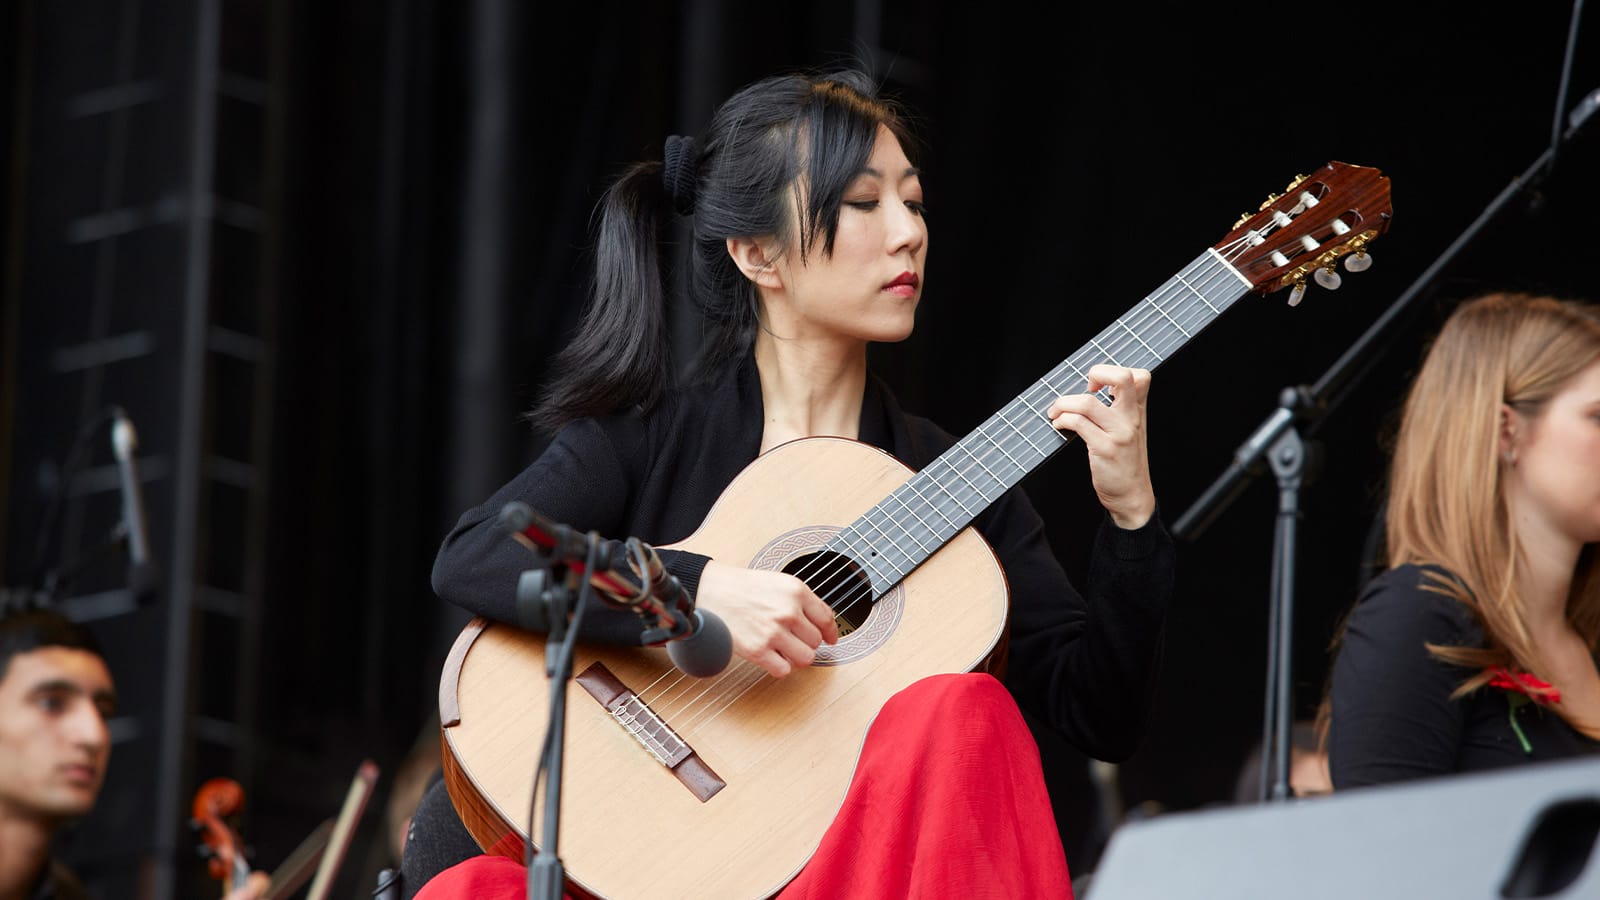 A woman in a red dress plays the guitar